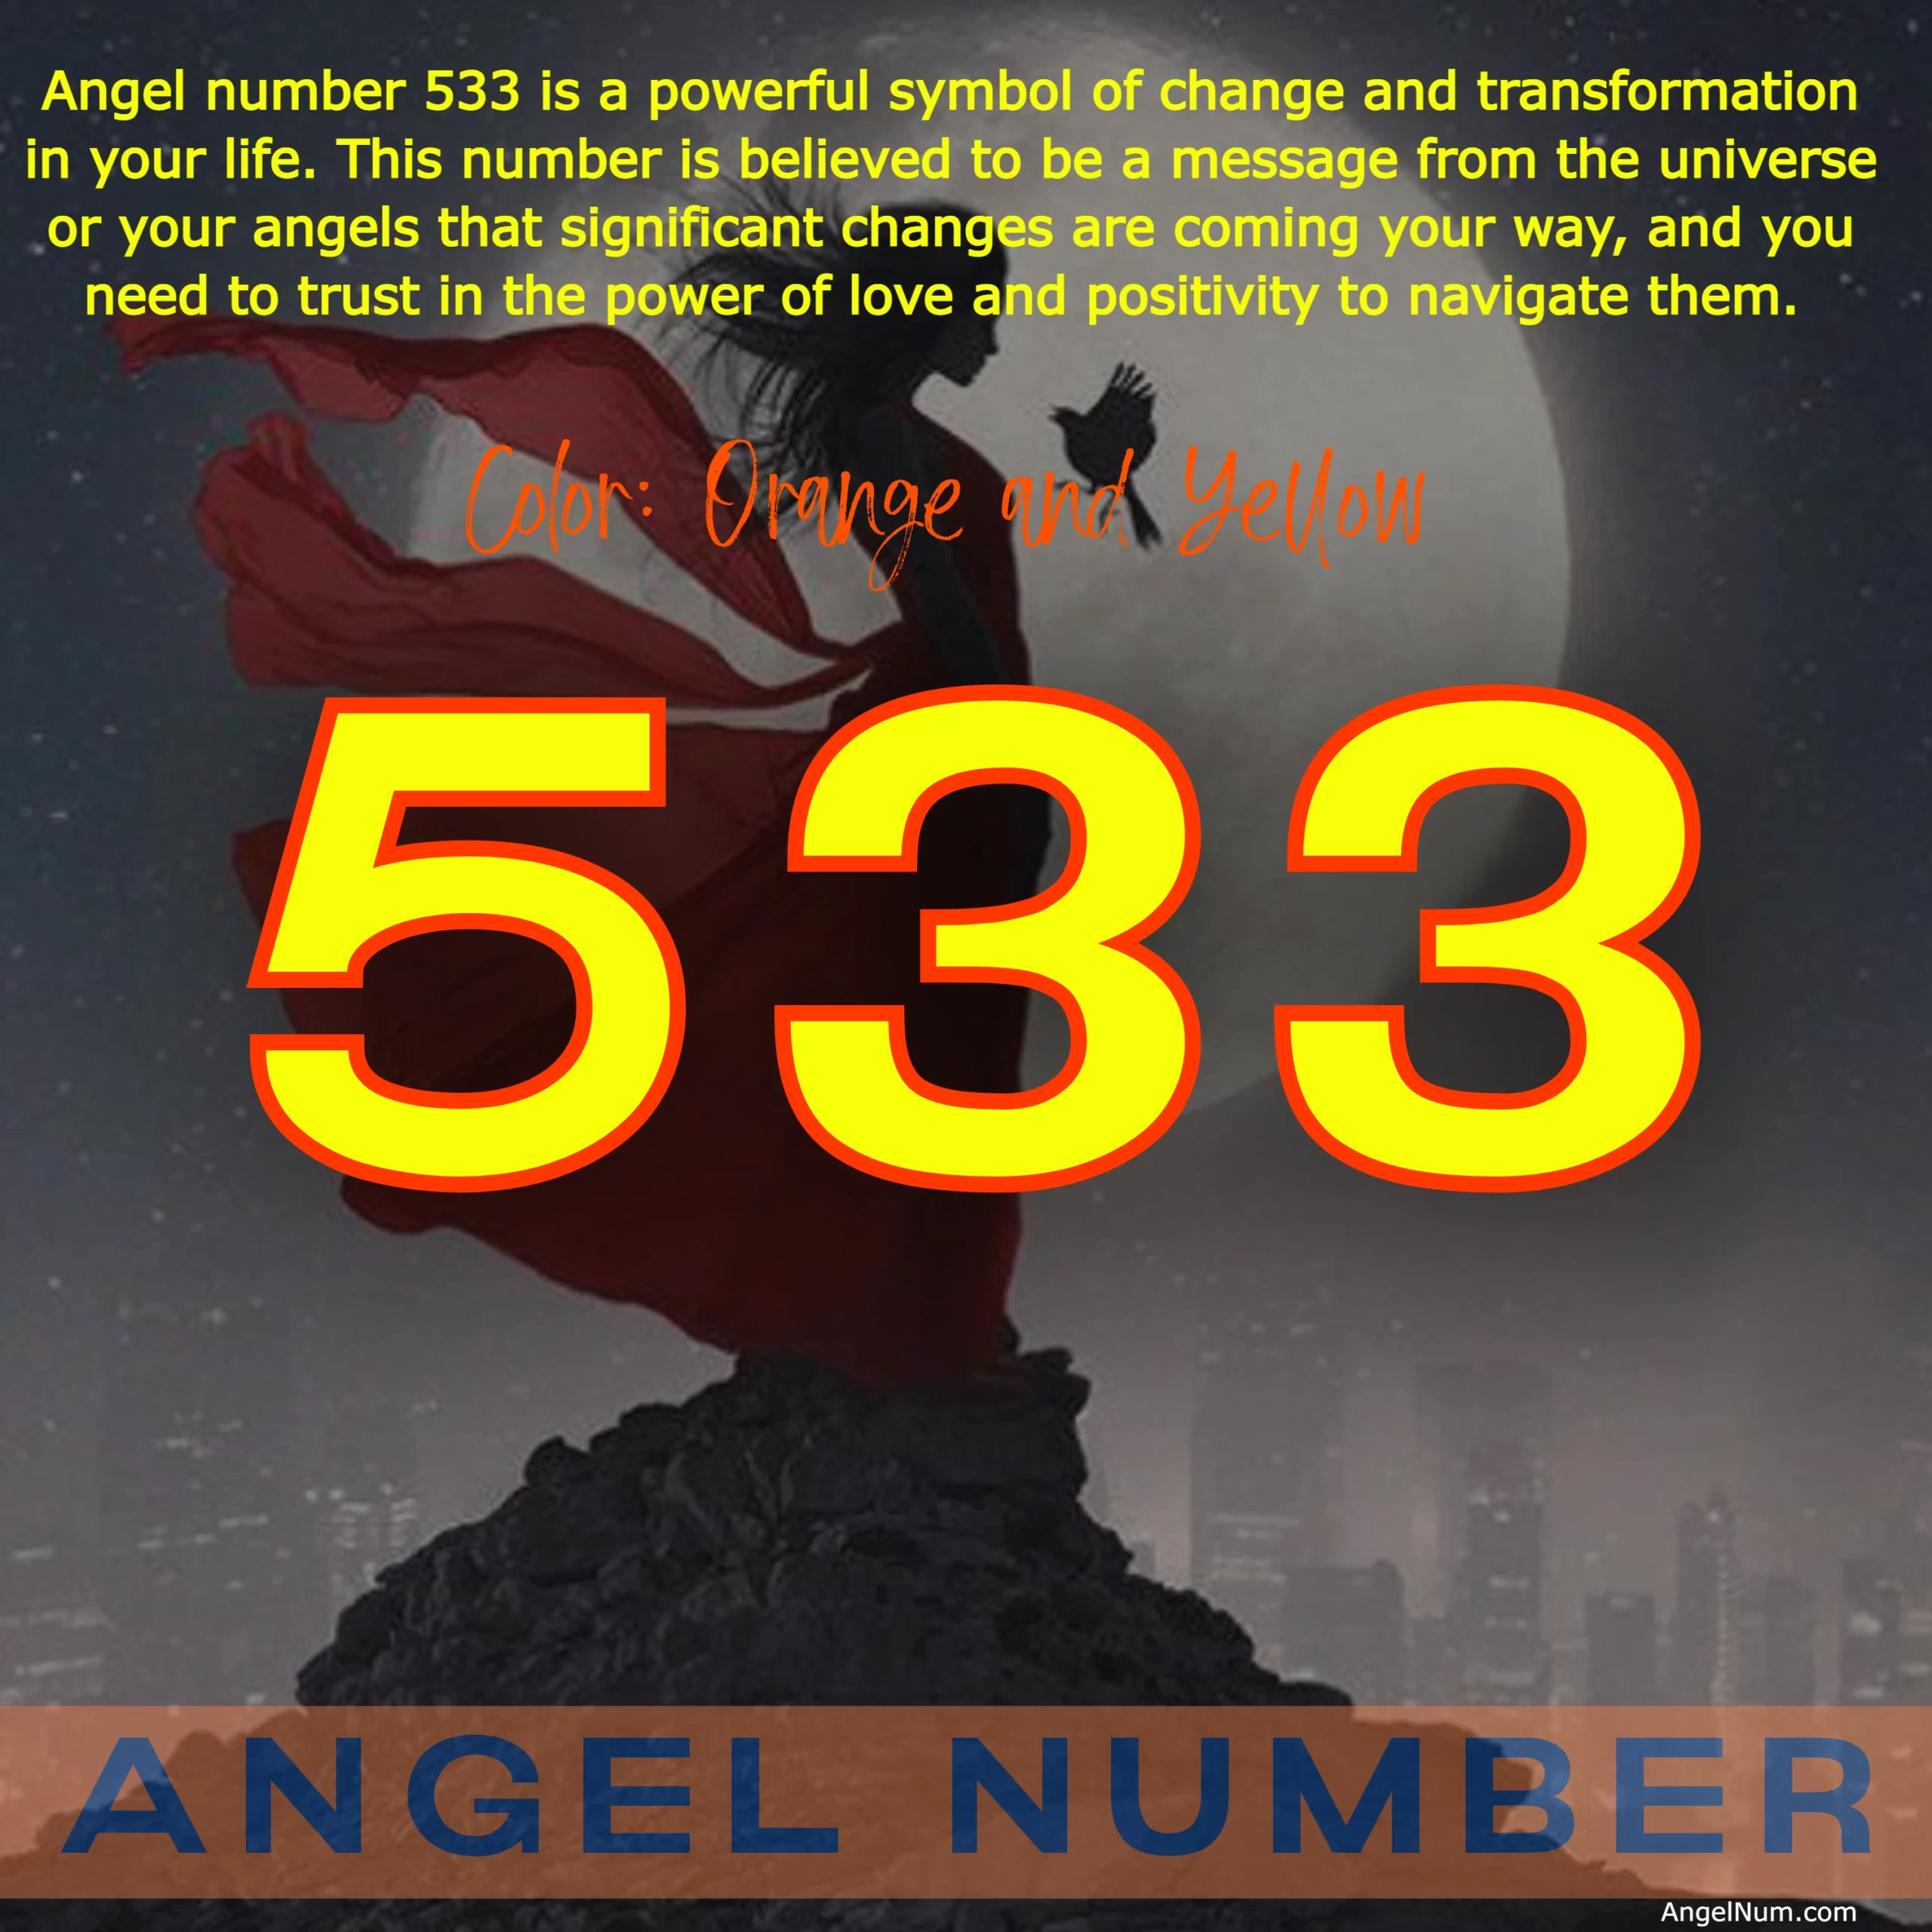 Angel Number 533: The Symbolism of Change and Transformation